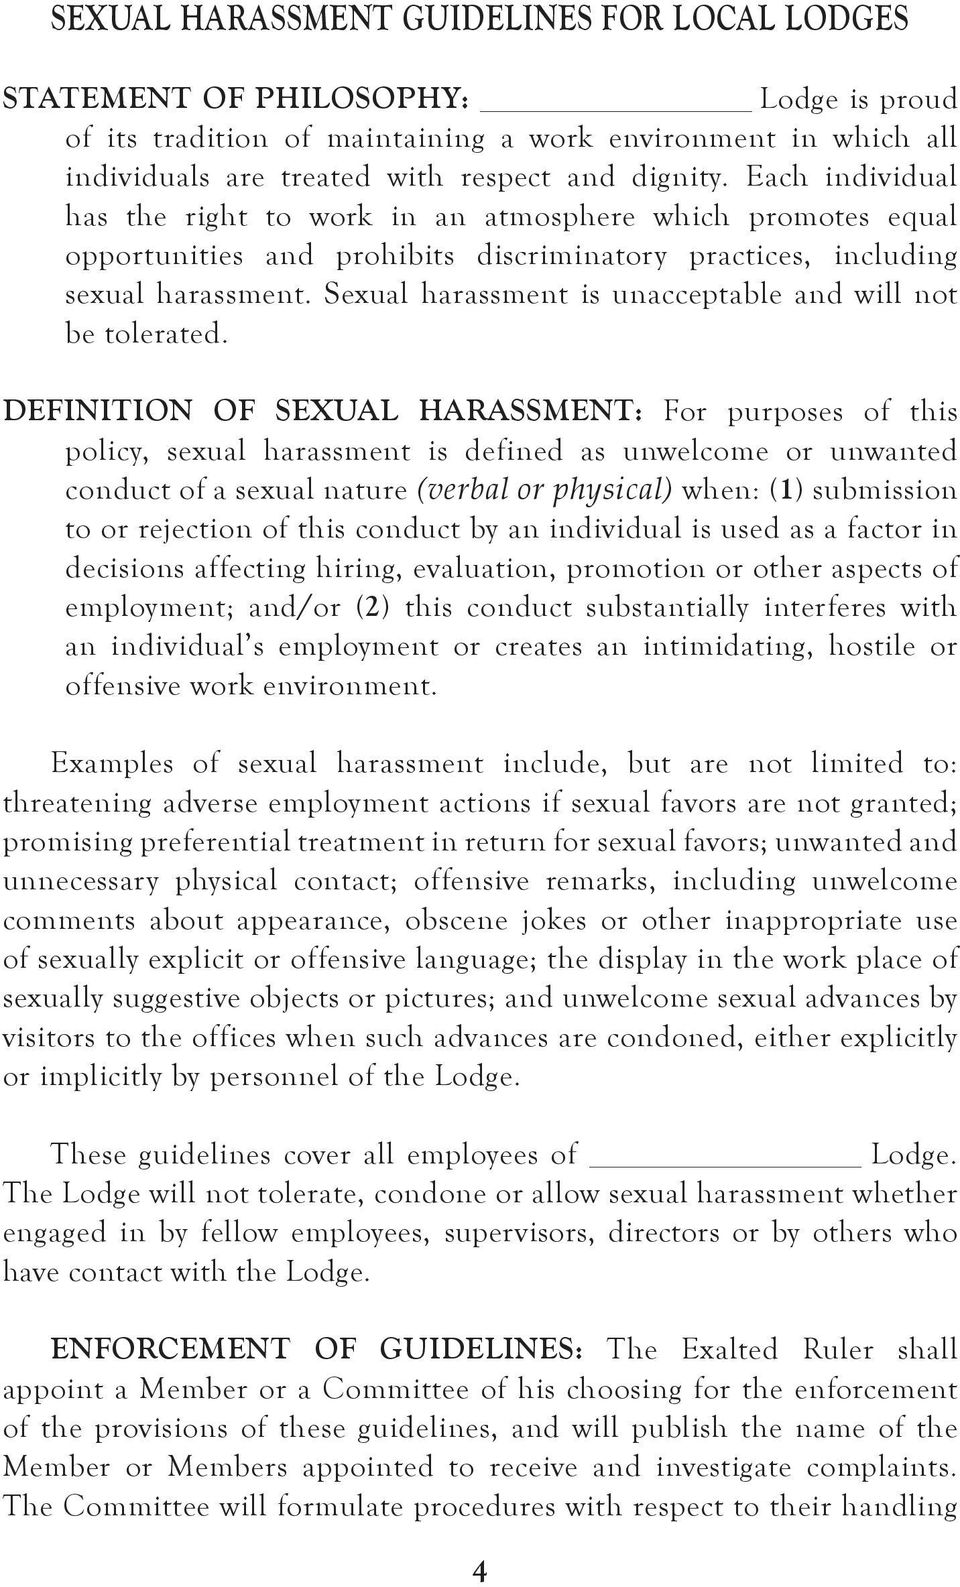 Sexual harassment is unacceptable and will not be tolerated.